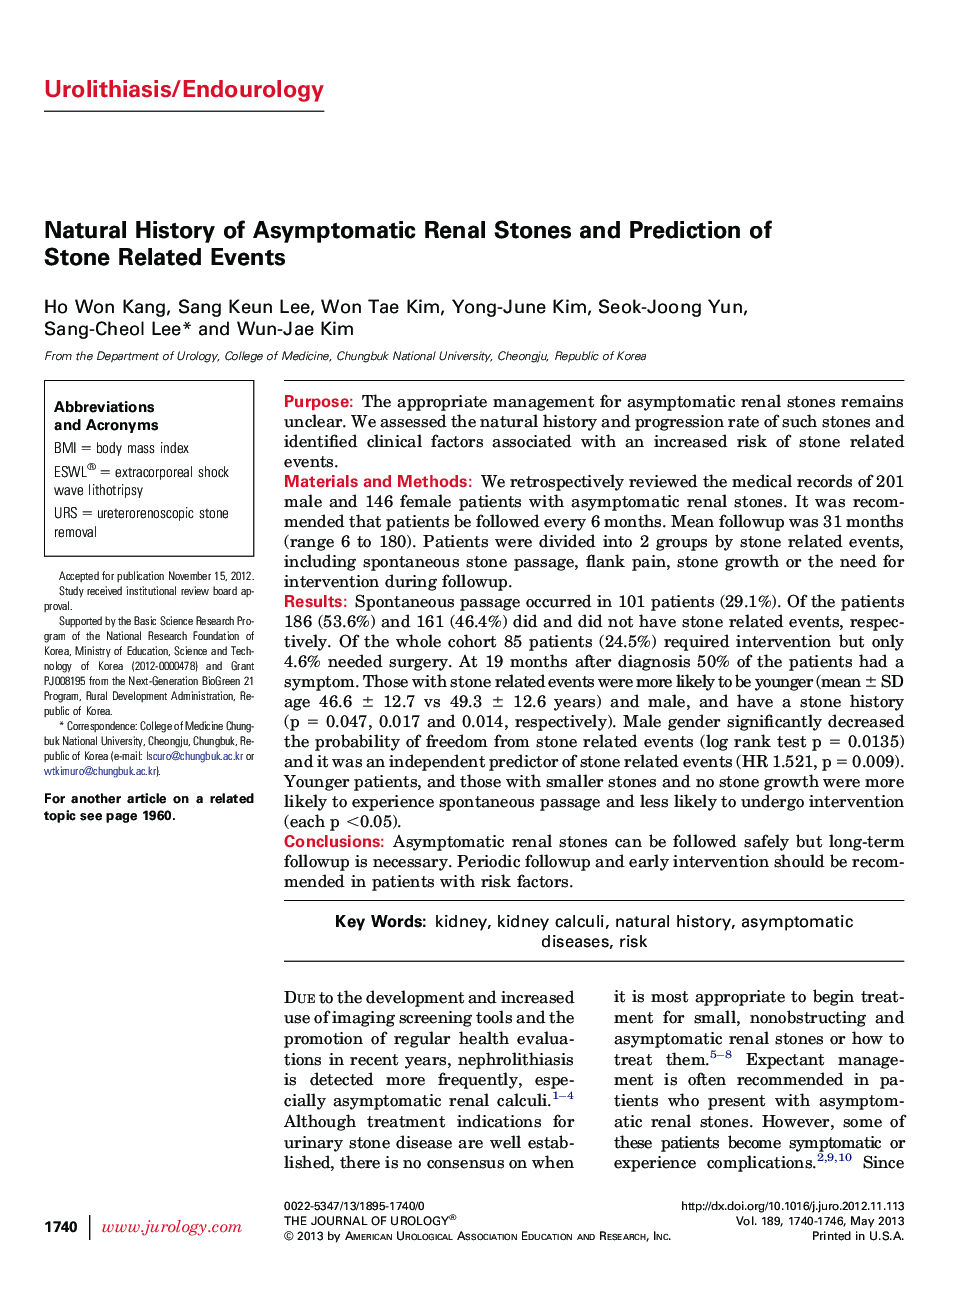 Natural History of Asymptomatic Renal Stones and Prediction of Stone Related Events